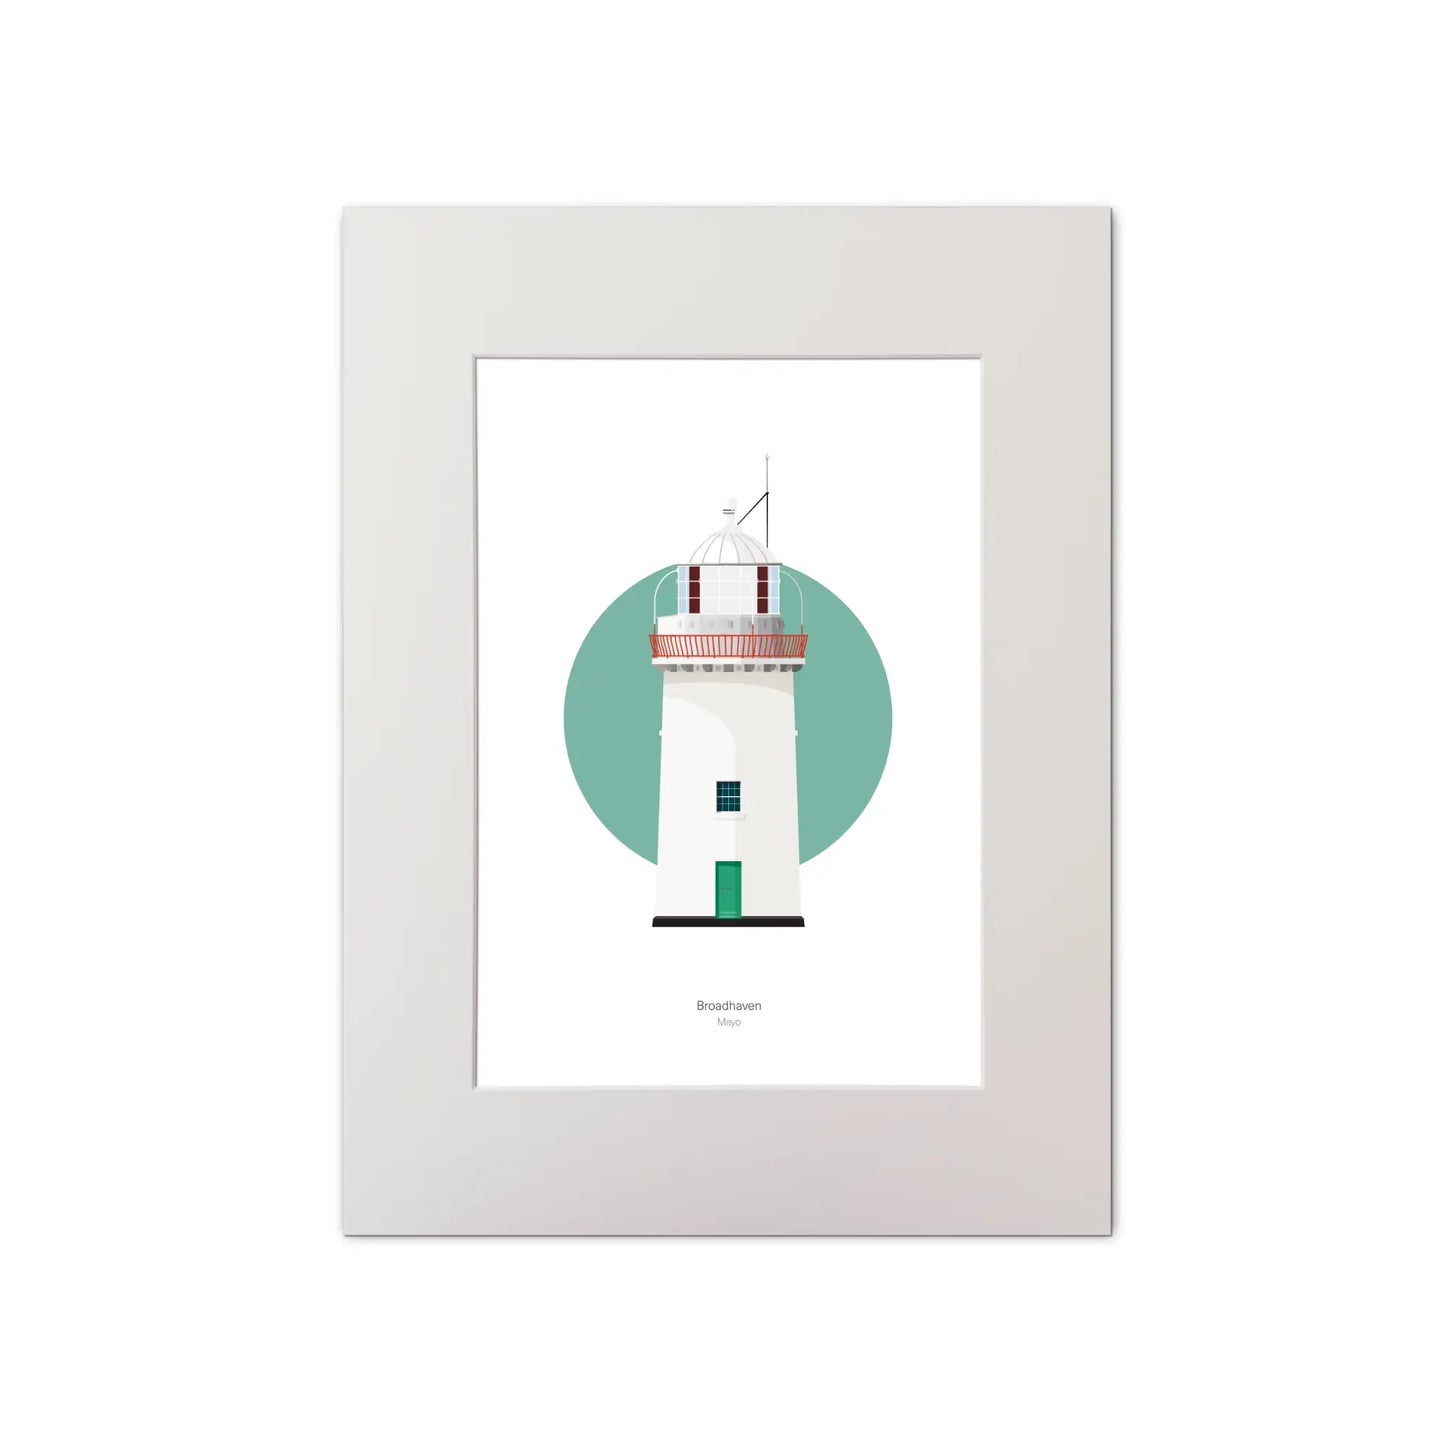 Illustration of Broadhaven lighthouse on a white background inside light blue square, mounted and measuring 30x40cm.